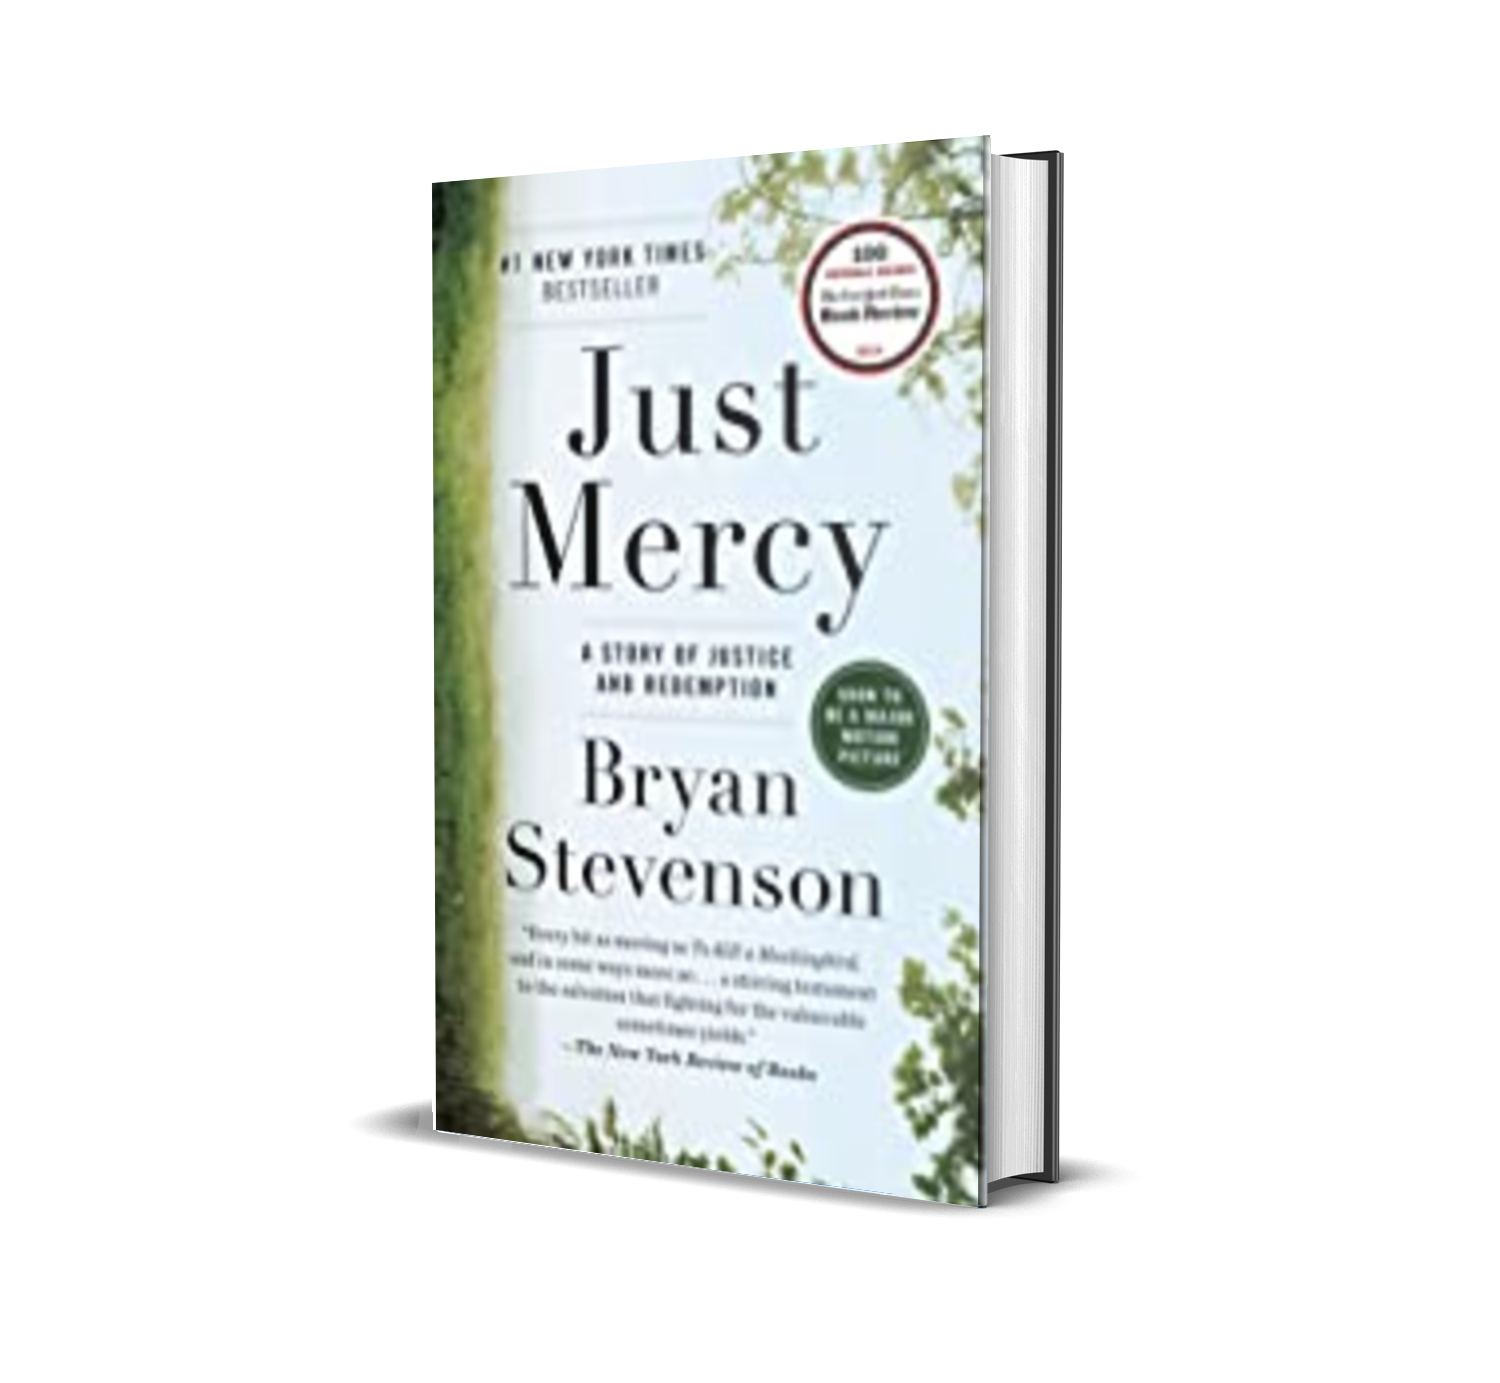 book review of just mercy by bryan stevenson